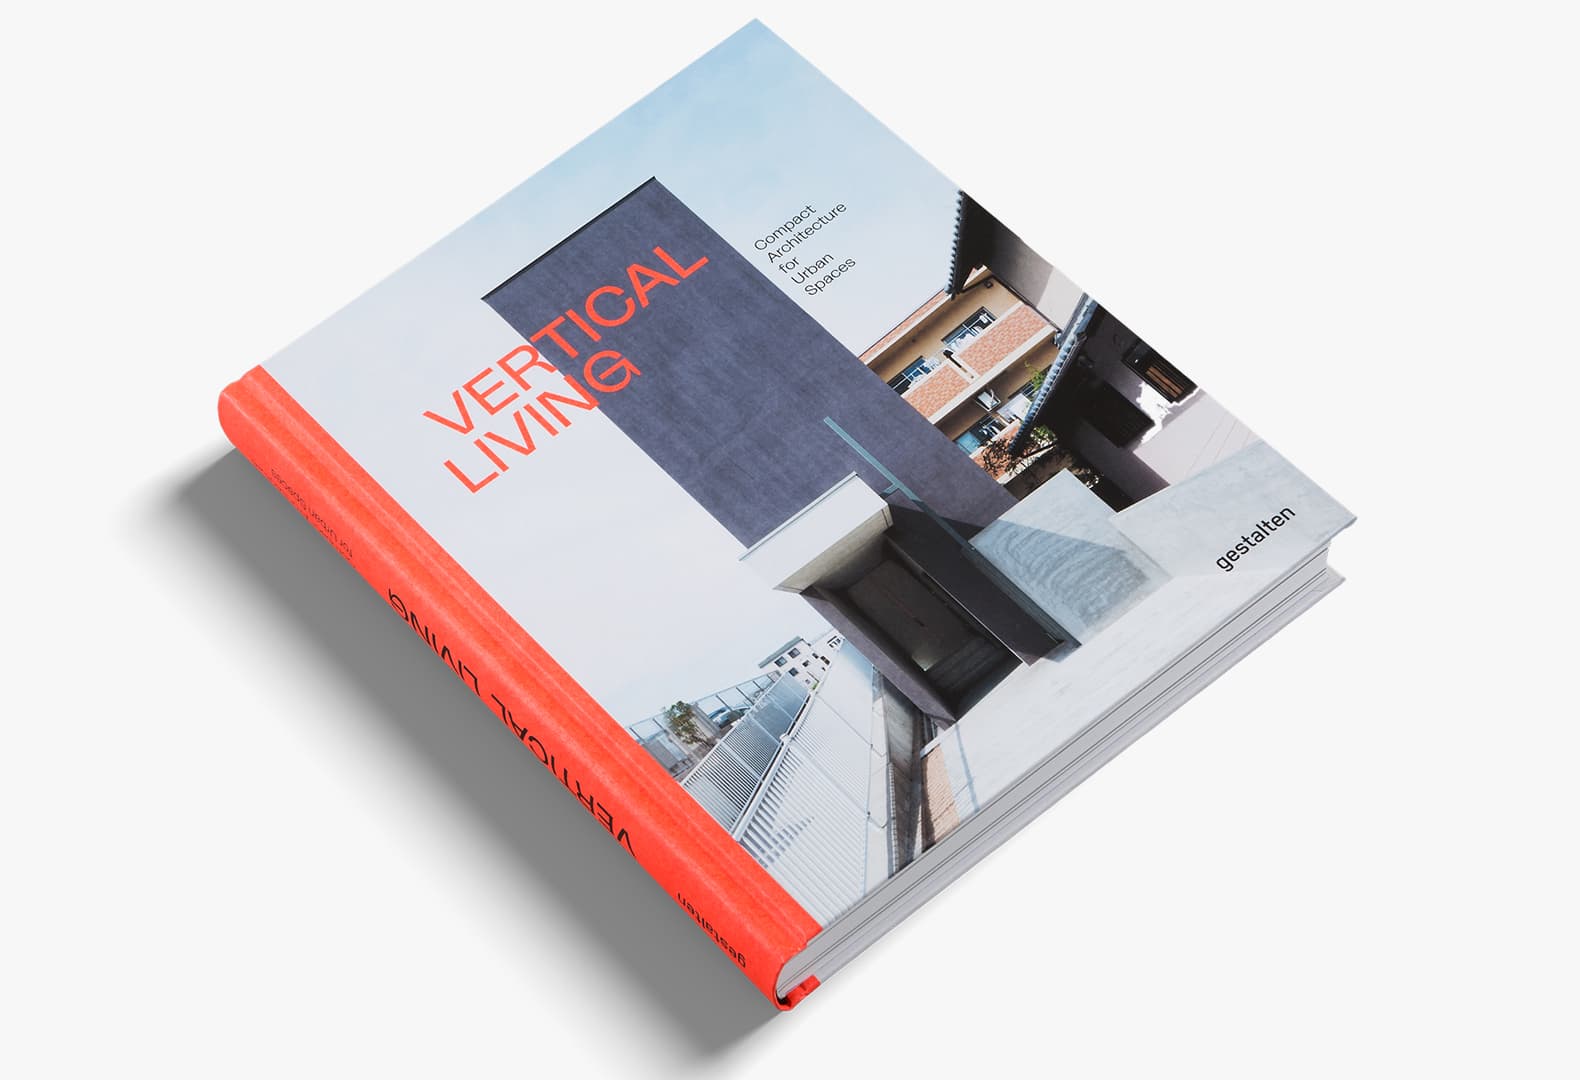 Vertical Living. Compact Architecture for Urban Spaces, gestalten 2021